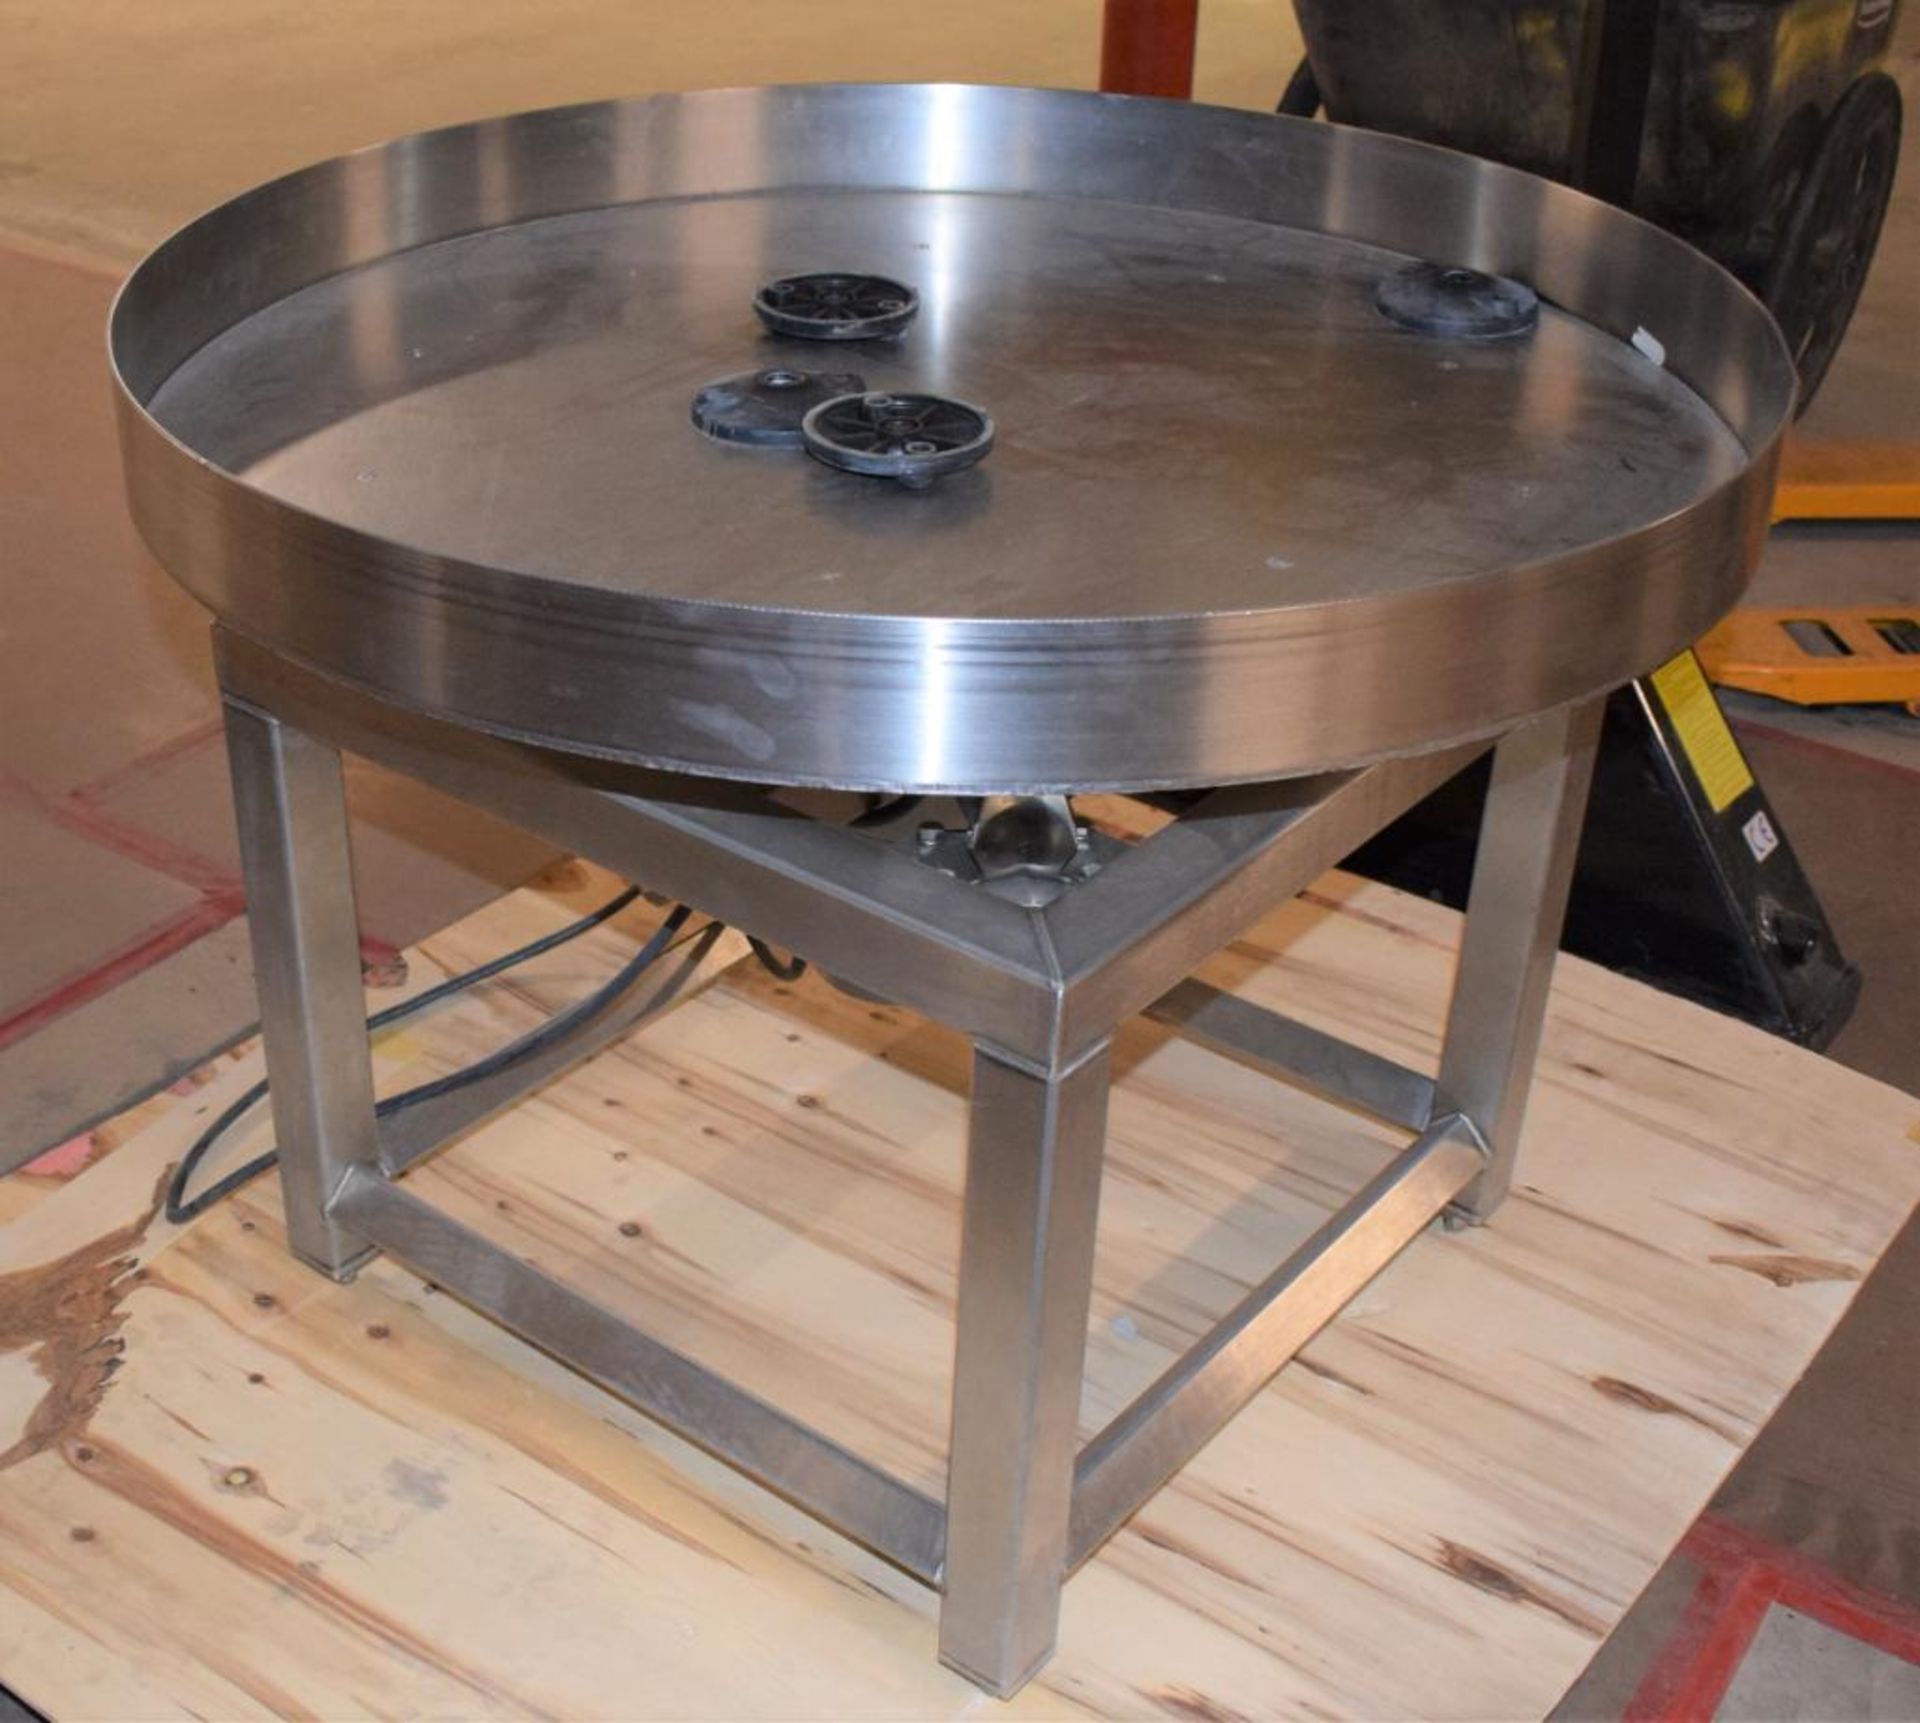 Accumulation Table, Approximate 36" Diameter, Stainless Steel. Includes a gearmotor and Lenze AC Tec - Image 2 of 6